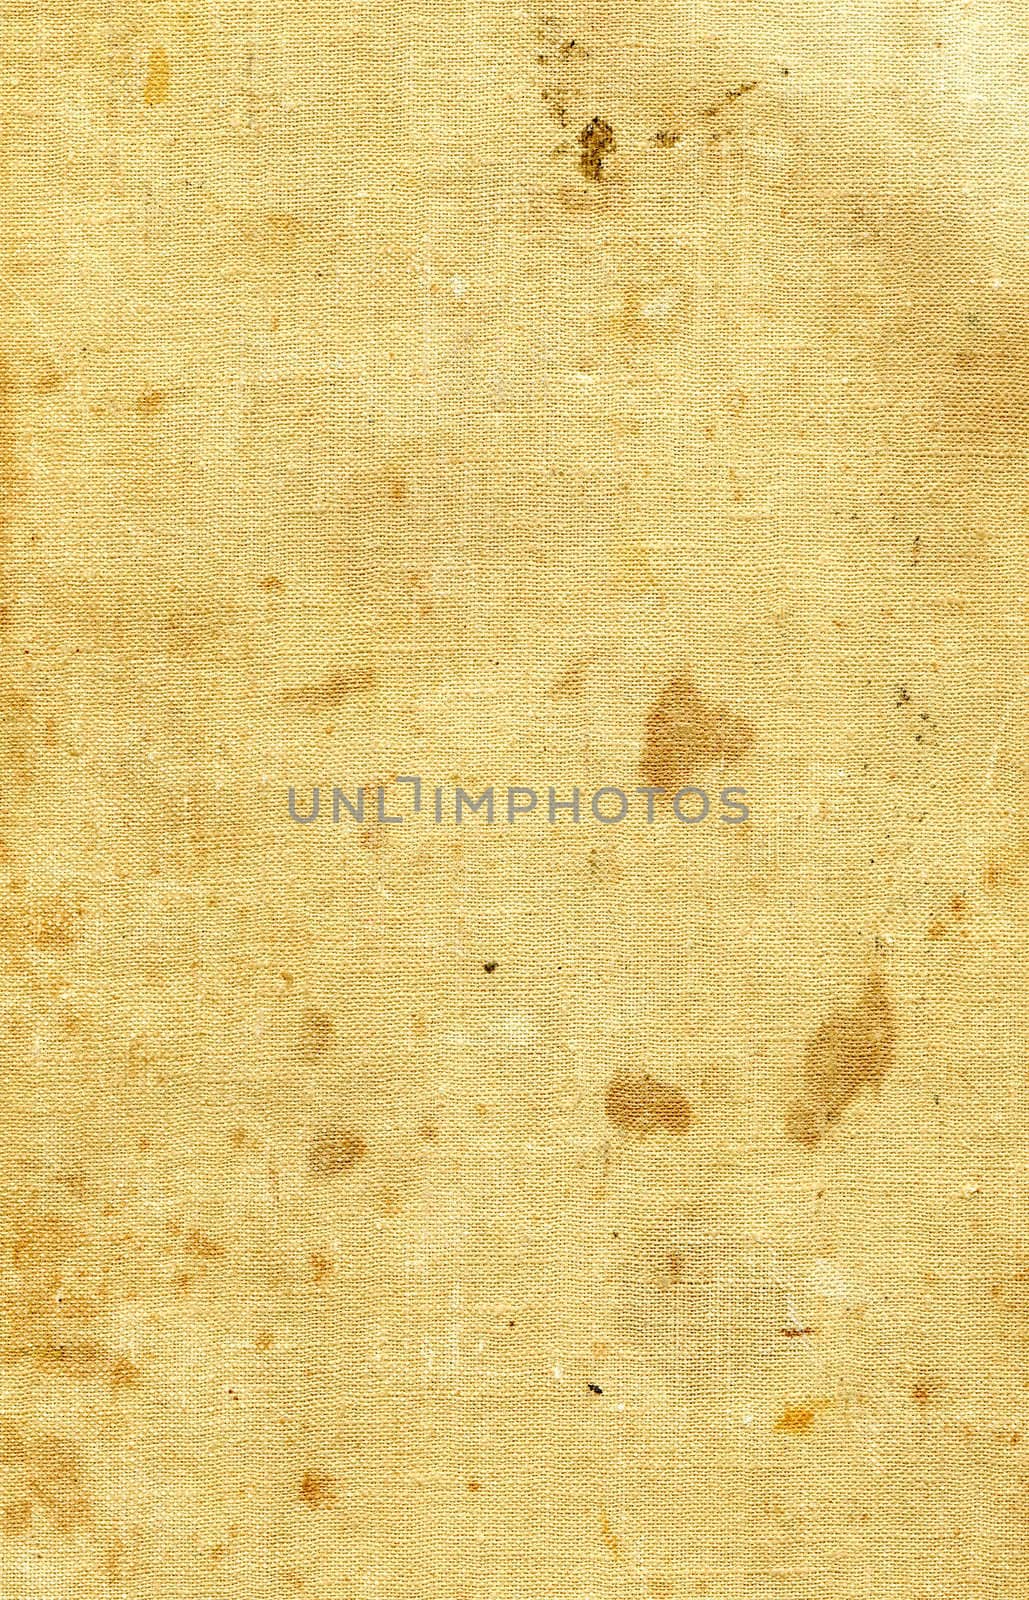 Background made with old textured paper. Vintage grungy paper.